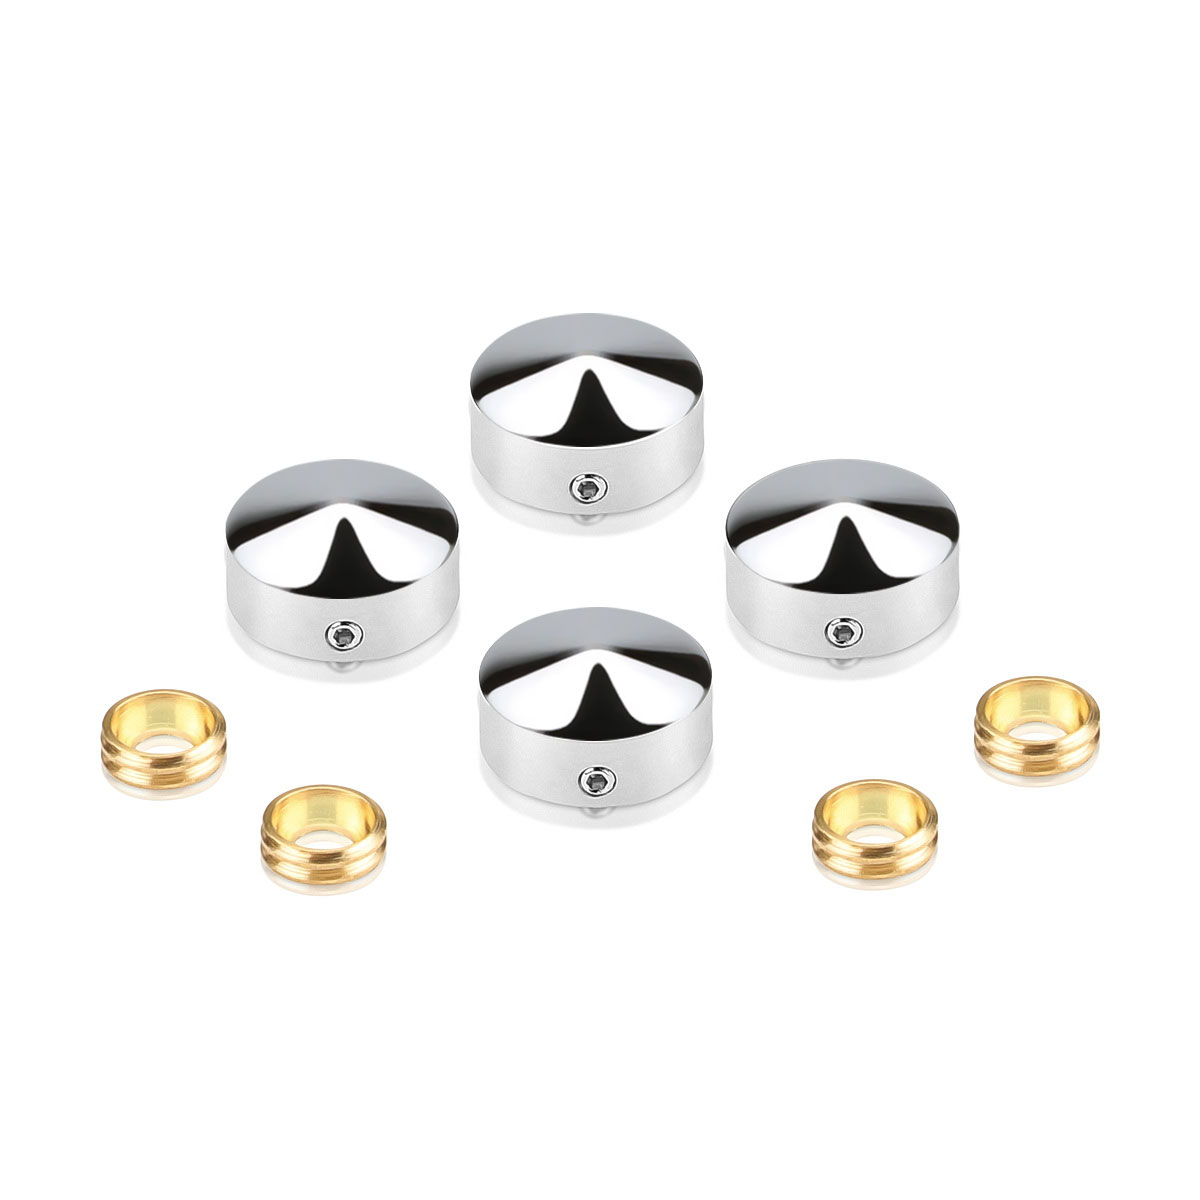 Set of 4 Conical Locking Screw Cover Diameter 11/16'', Polished Stainless Steel Finish (Indoor Use Only)